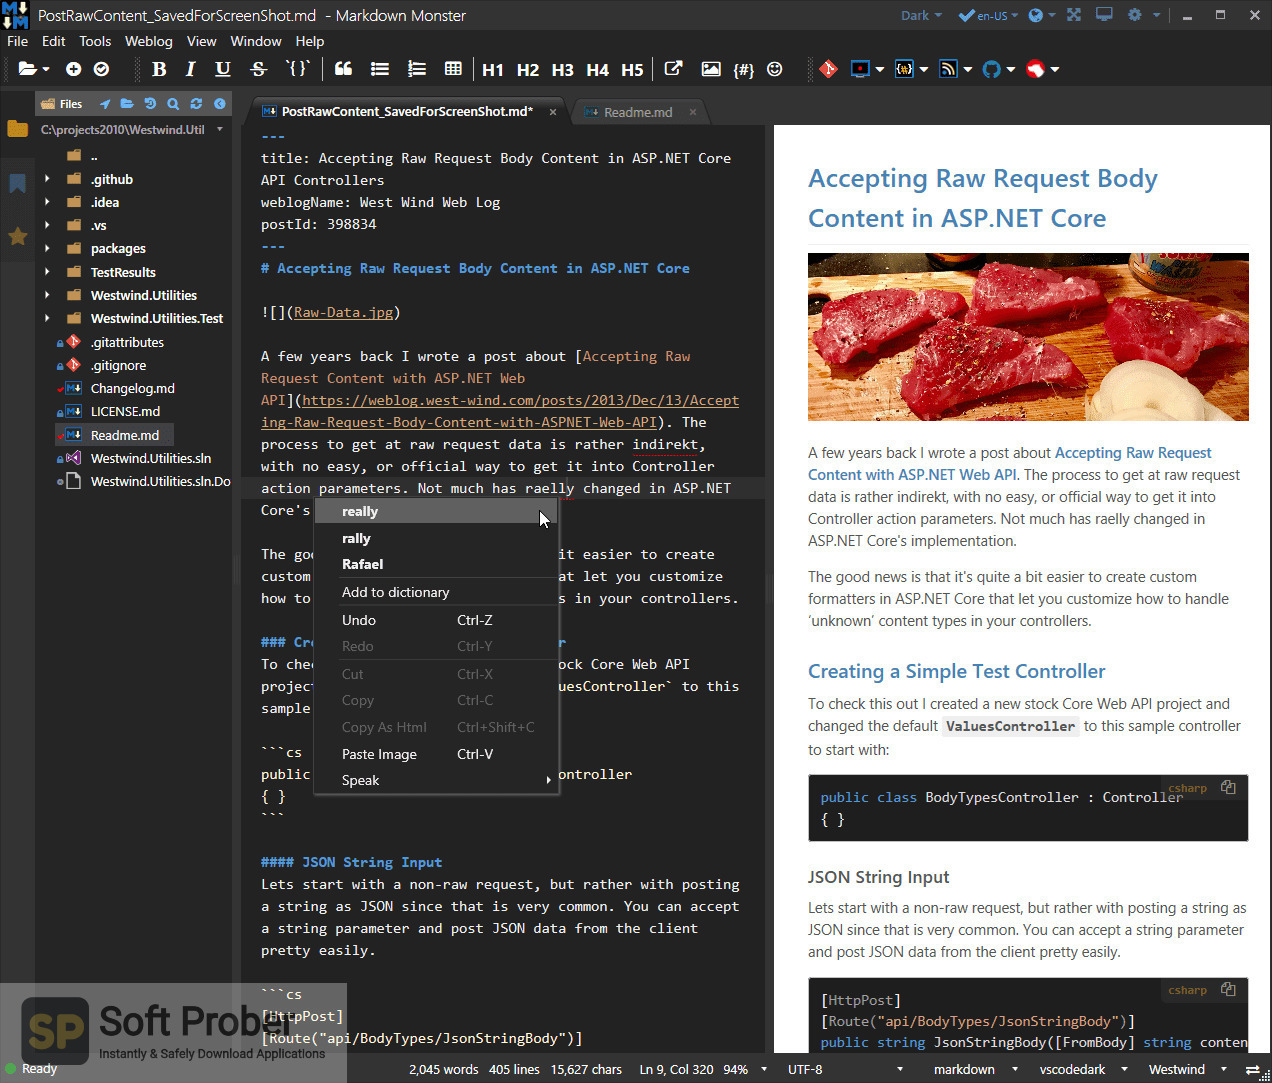 download the new version Markdown Monster 3.0.0.14